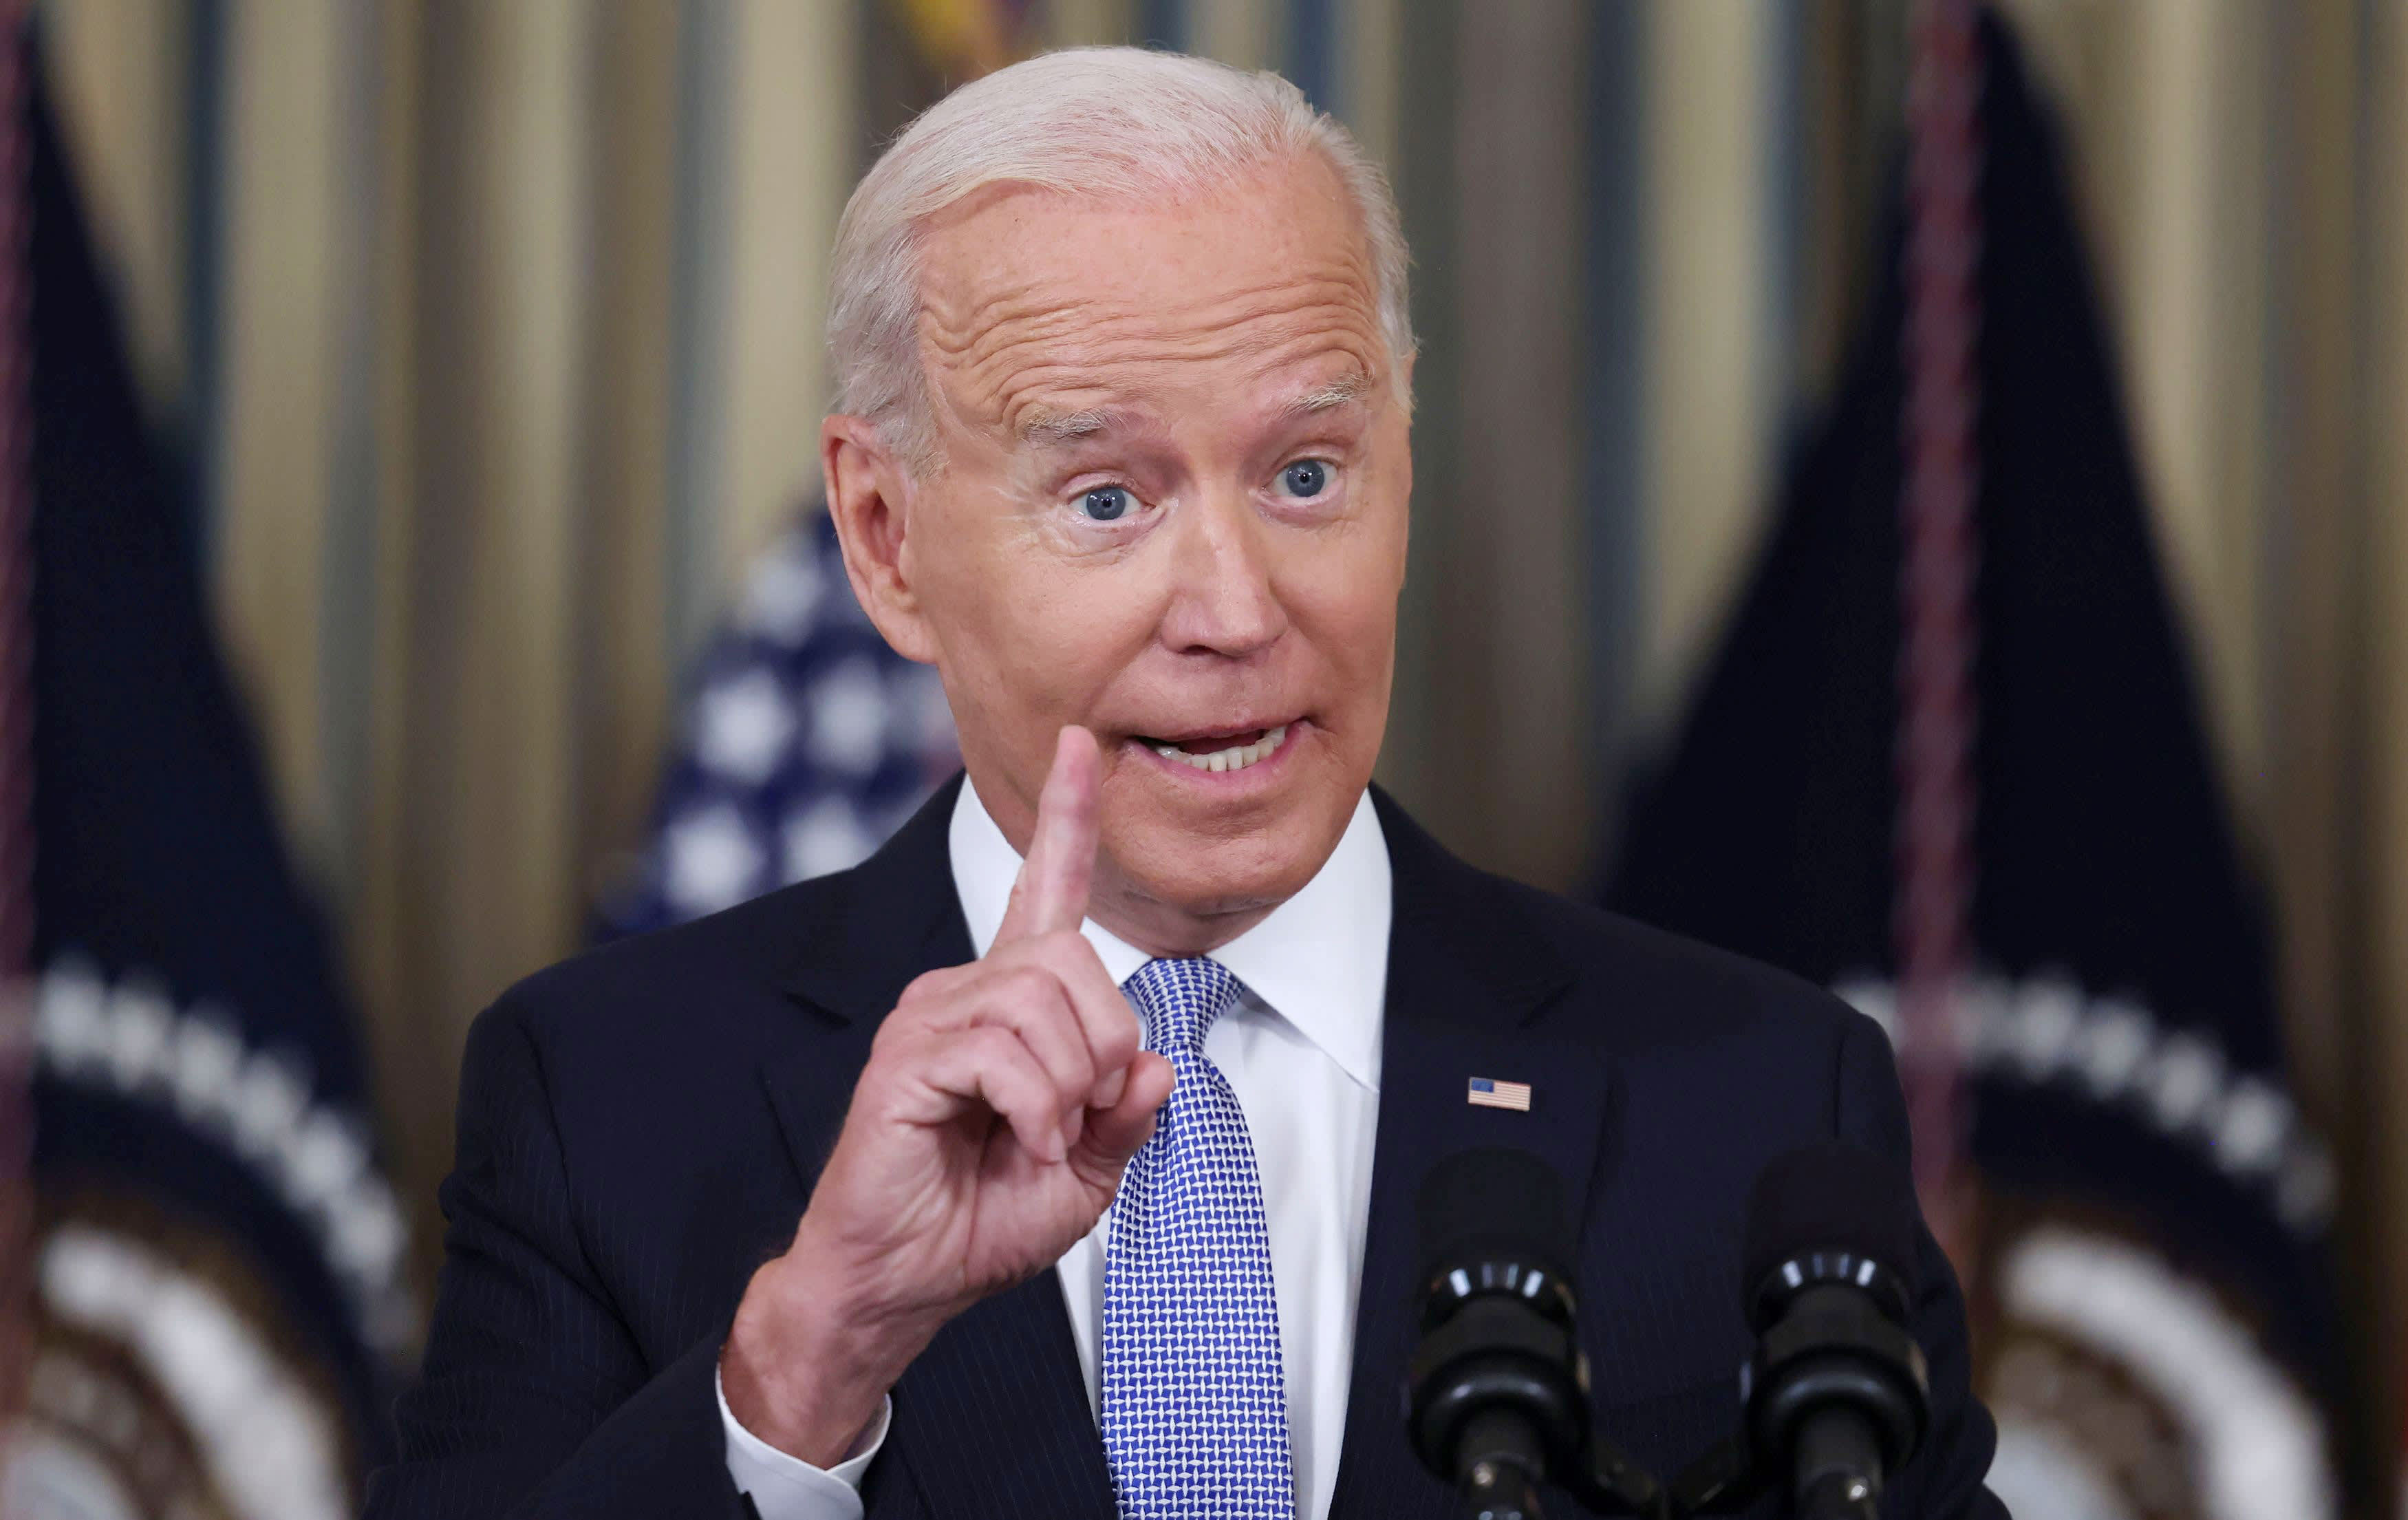 Biden says unvaccinated Americans are 'costing all of us' as he presses Covid va..